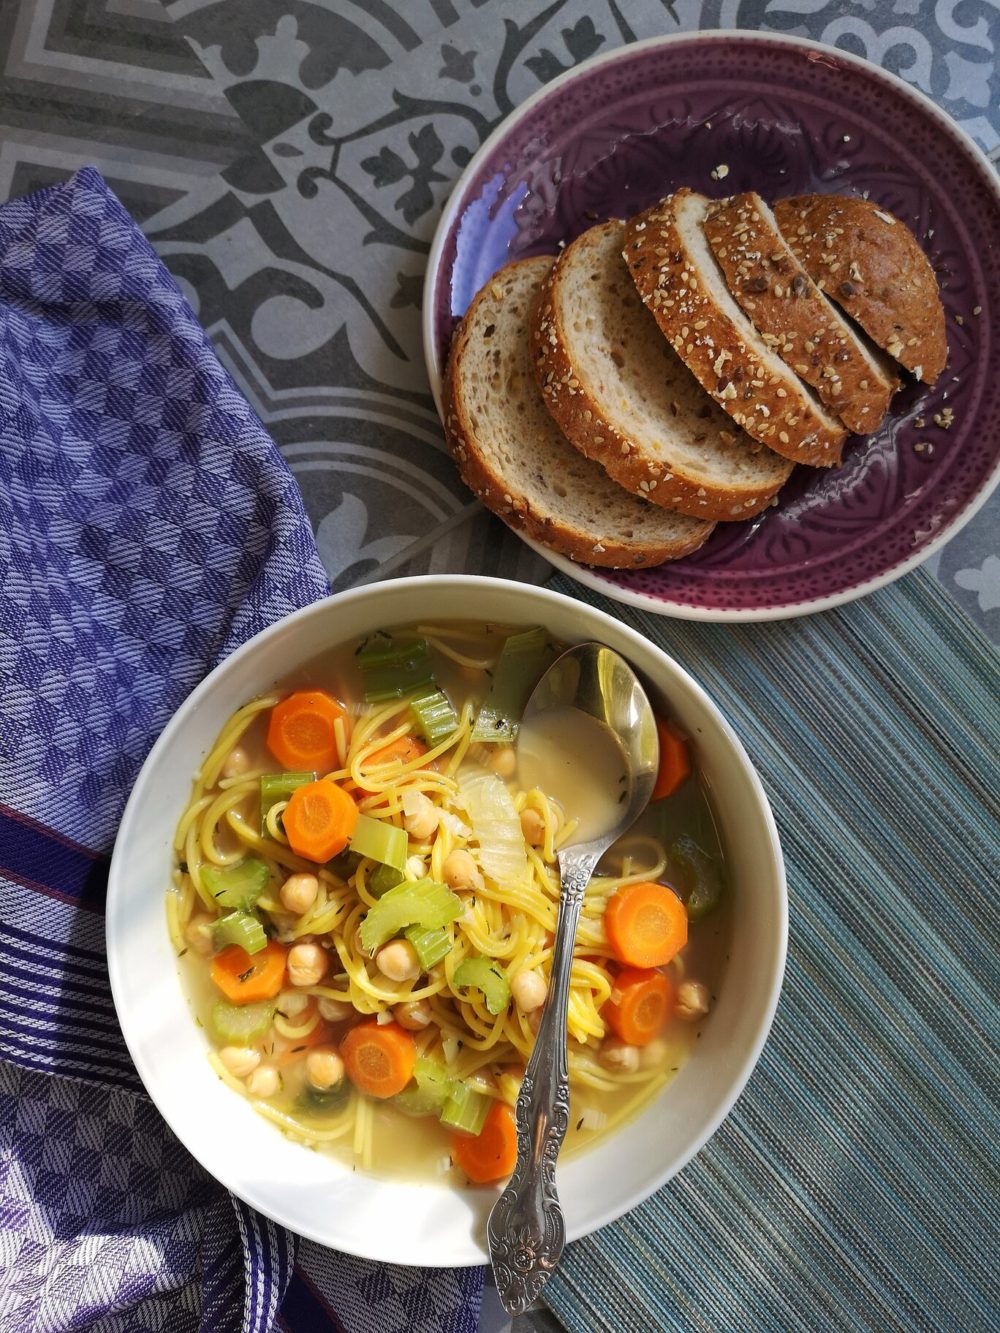 vegan chickpea spaghetti soup in a bowl with a spoon next to bread slices on a plate